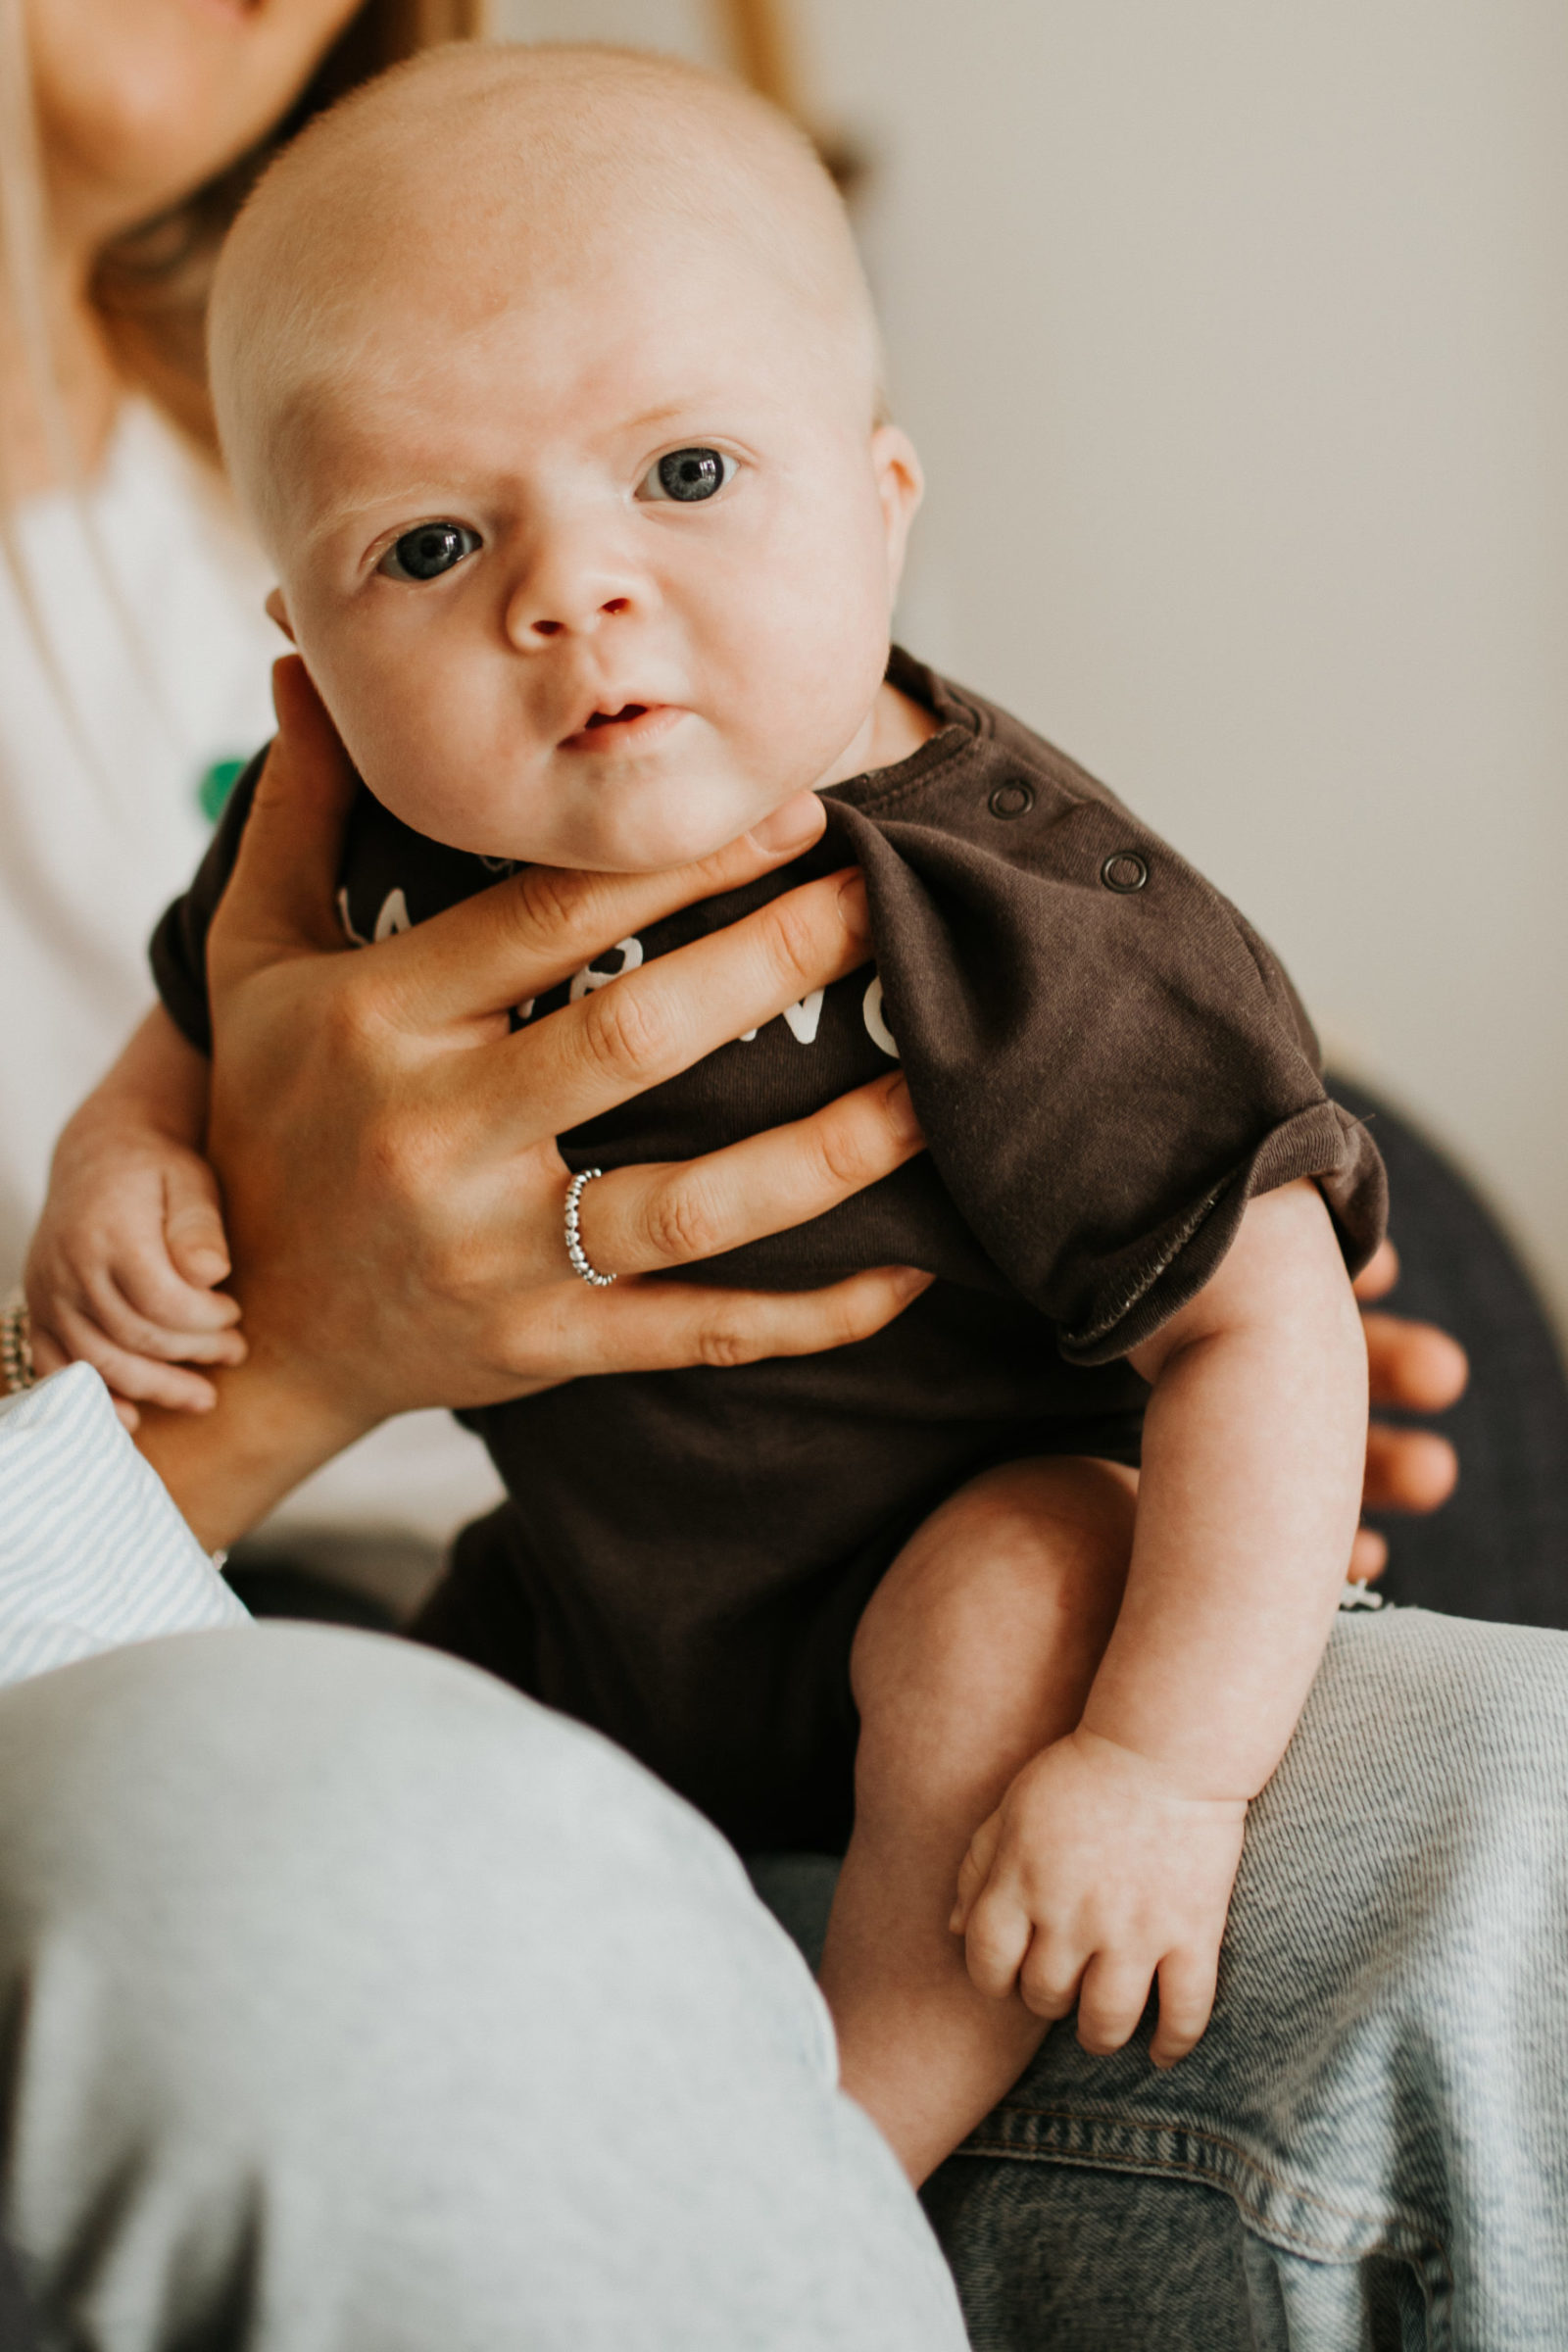 Baby looking directly at camera on mothers lap